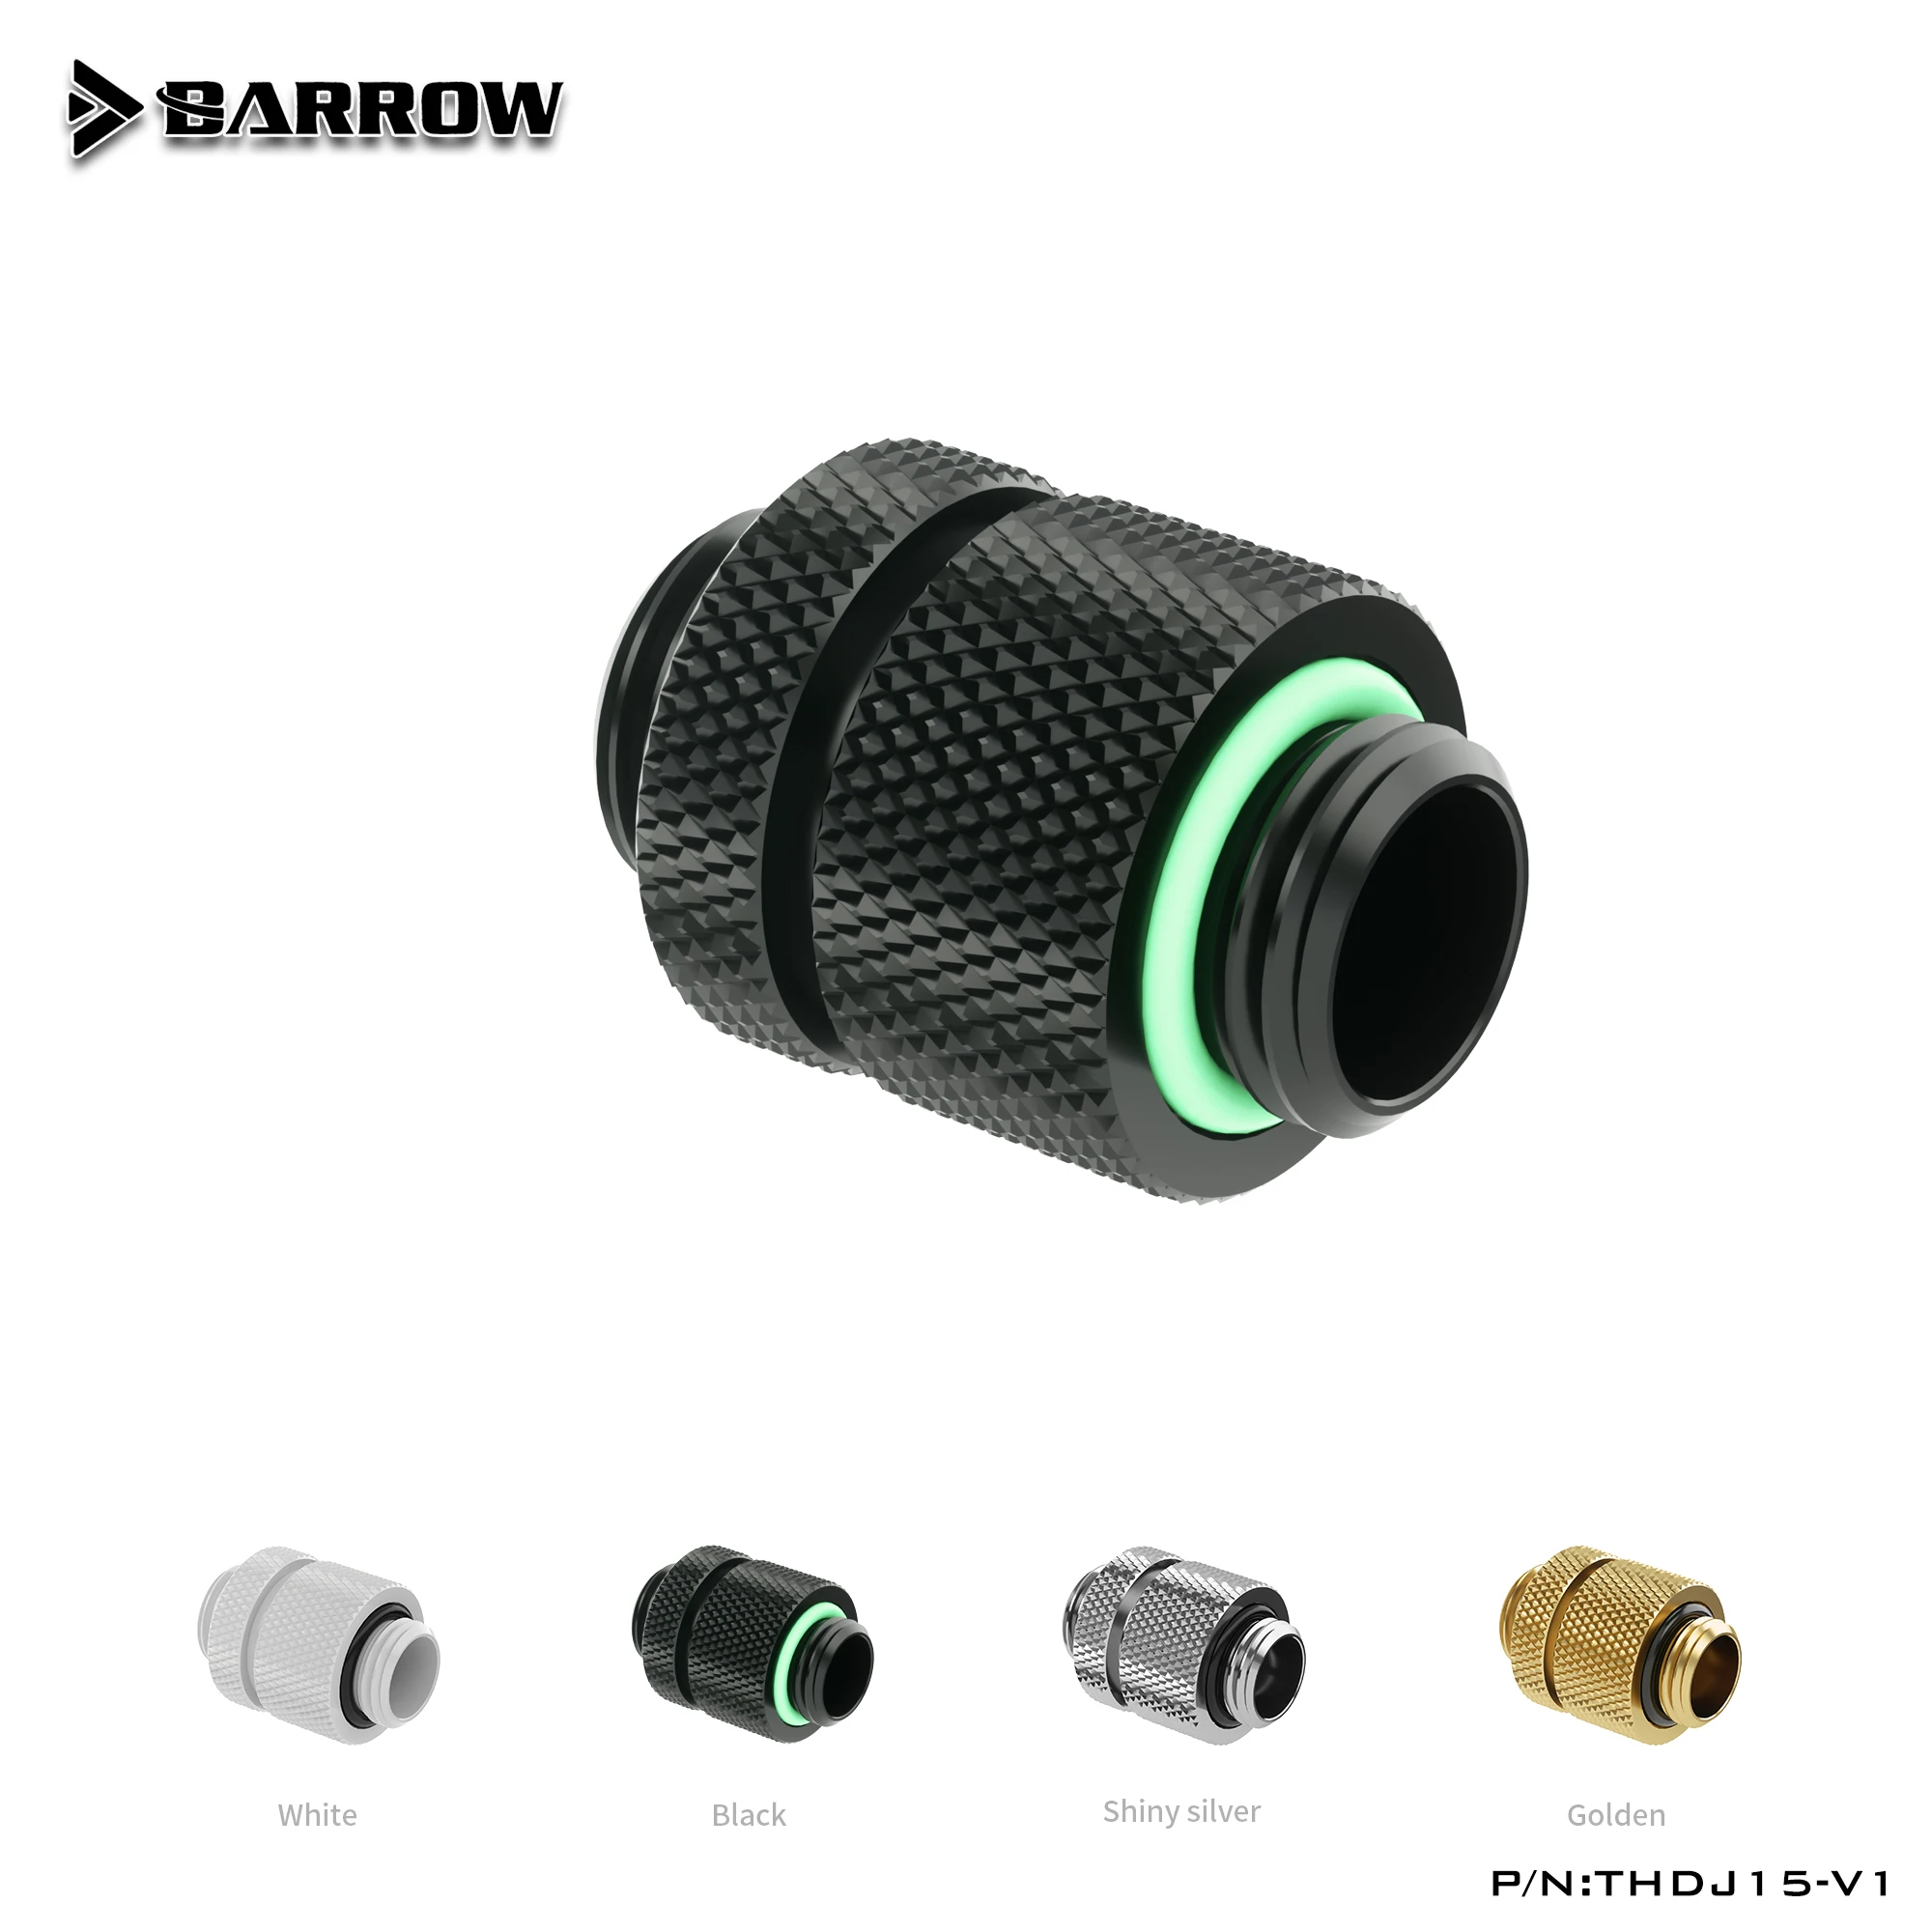 

BARROW G1/4",Multi Function Double Outer Thread 360 Rotatable Adapter DIY Fittings, Black/Bright Silver/White/Gold,THDJ15-V1